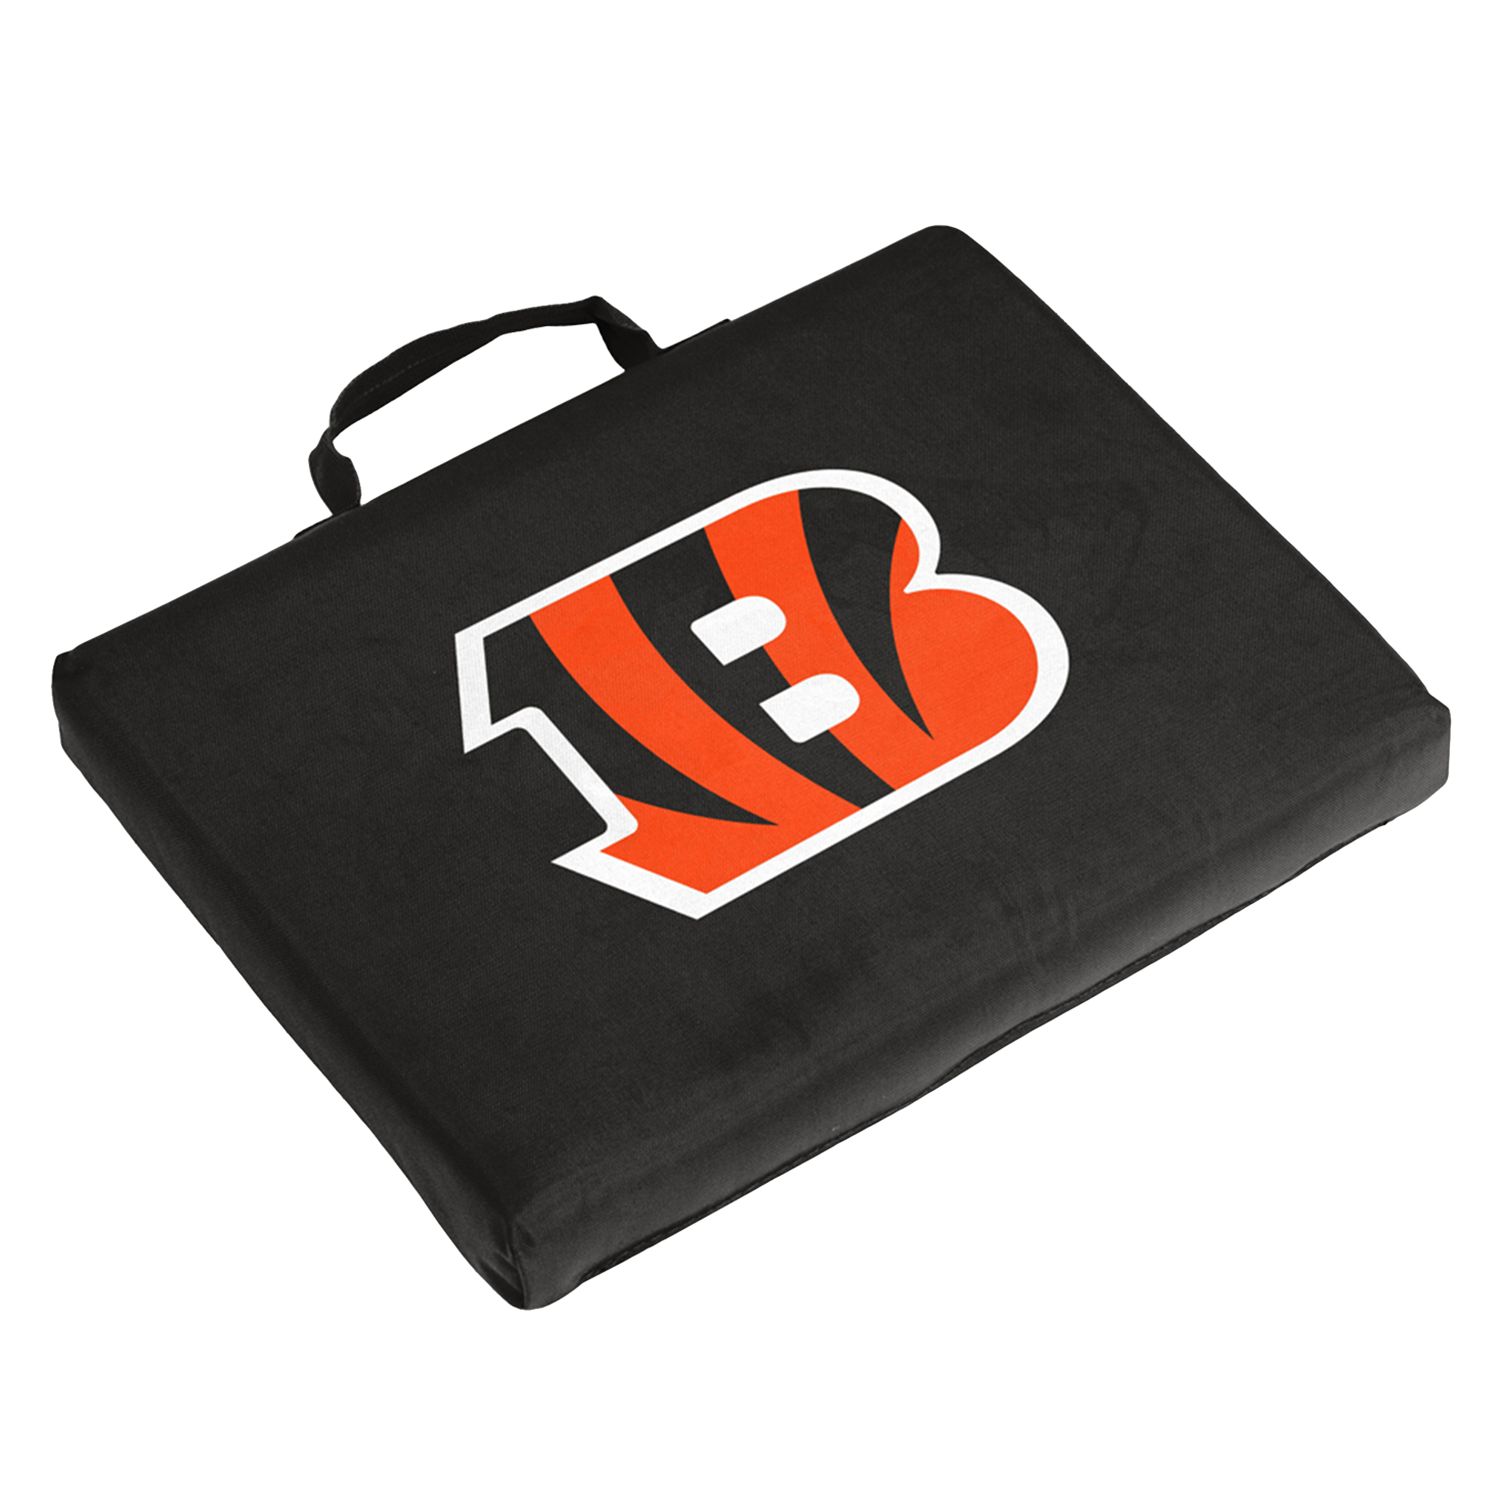 Bengals Tailgate Gear